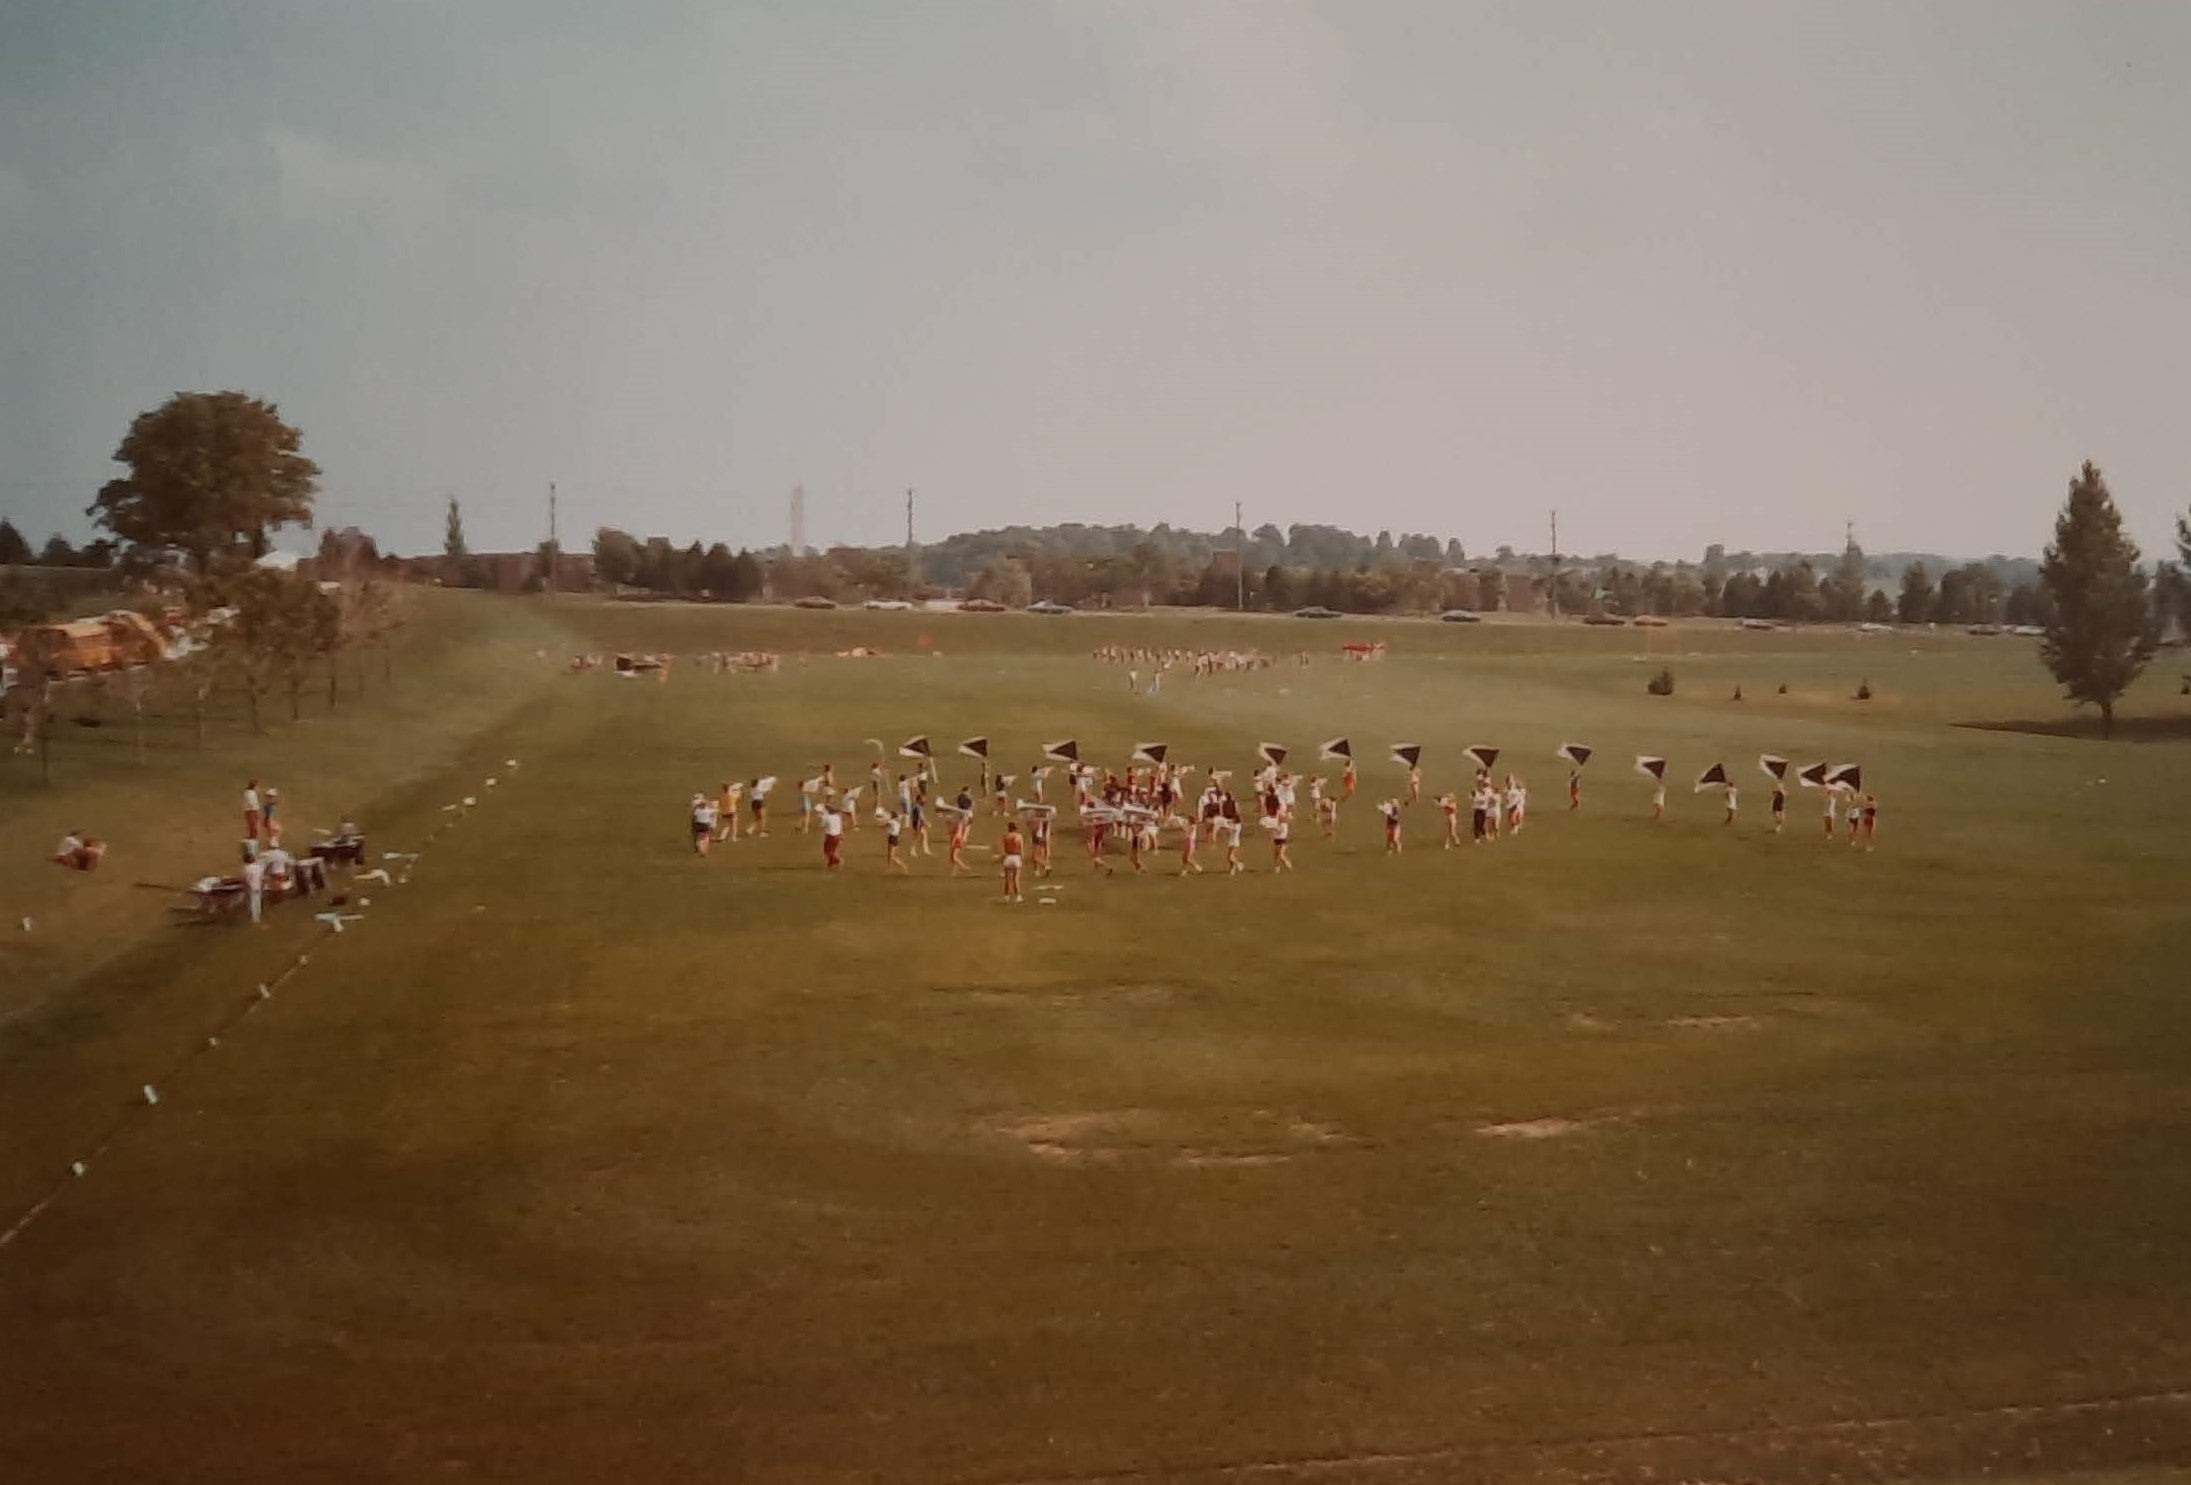 drum and bugle players practice in the field, in the distance.